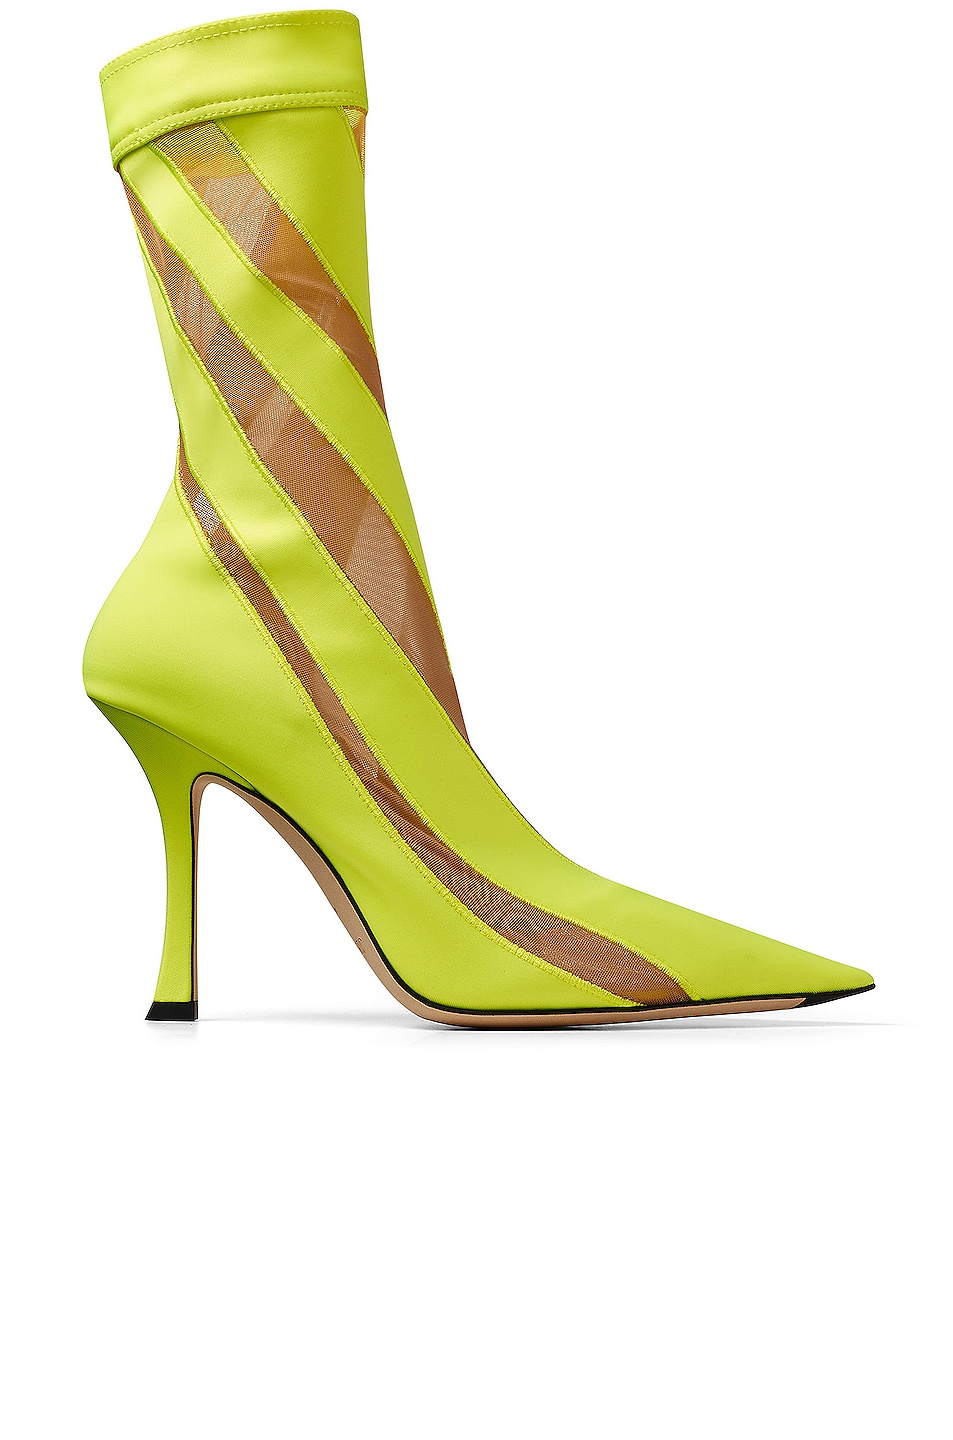 Image 1 of Jimmy Choo x Mugler Spiral Sock Ankle Boot in Neon Yellow & Nude